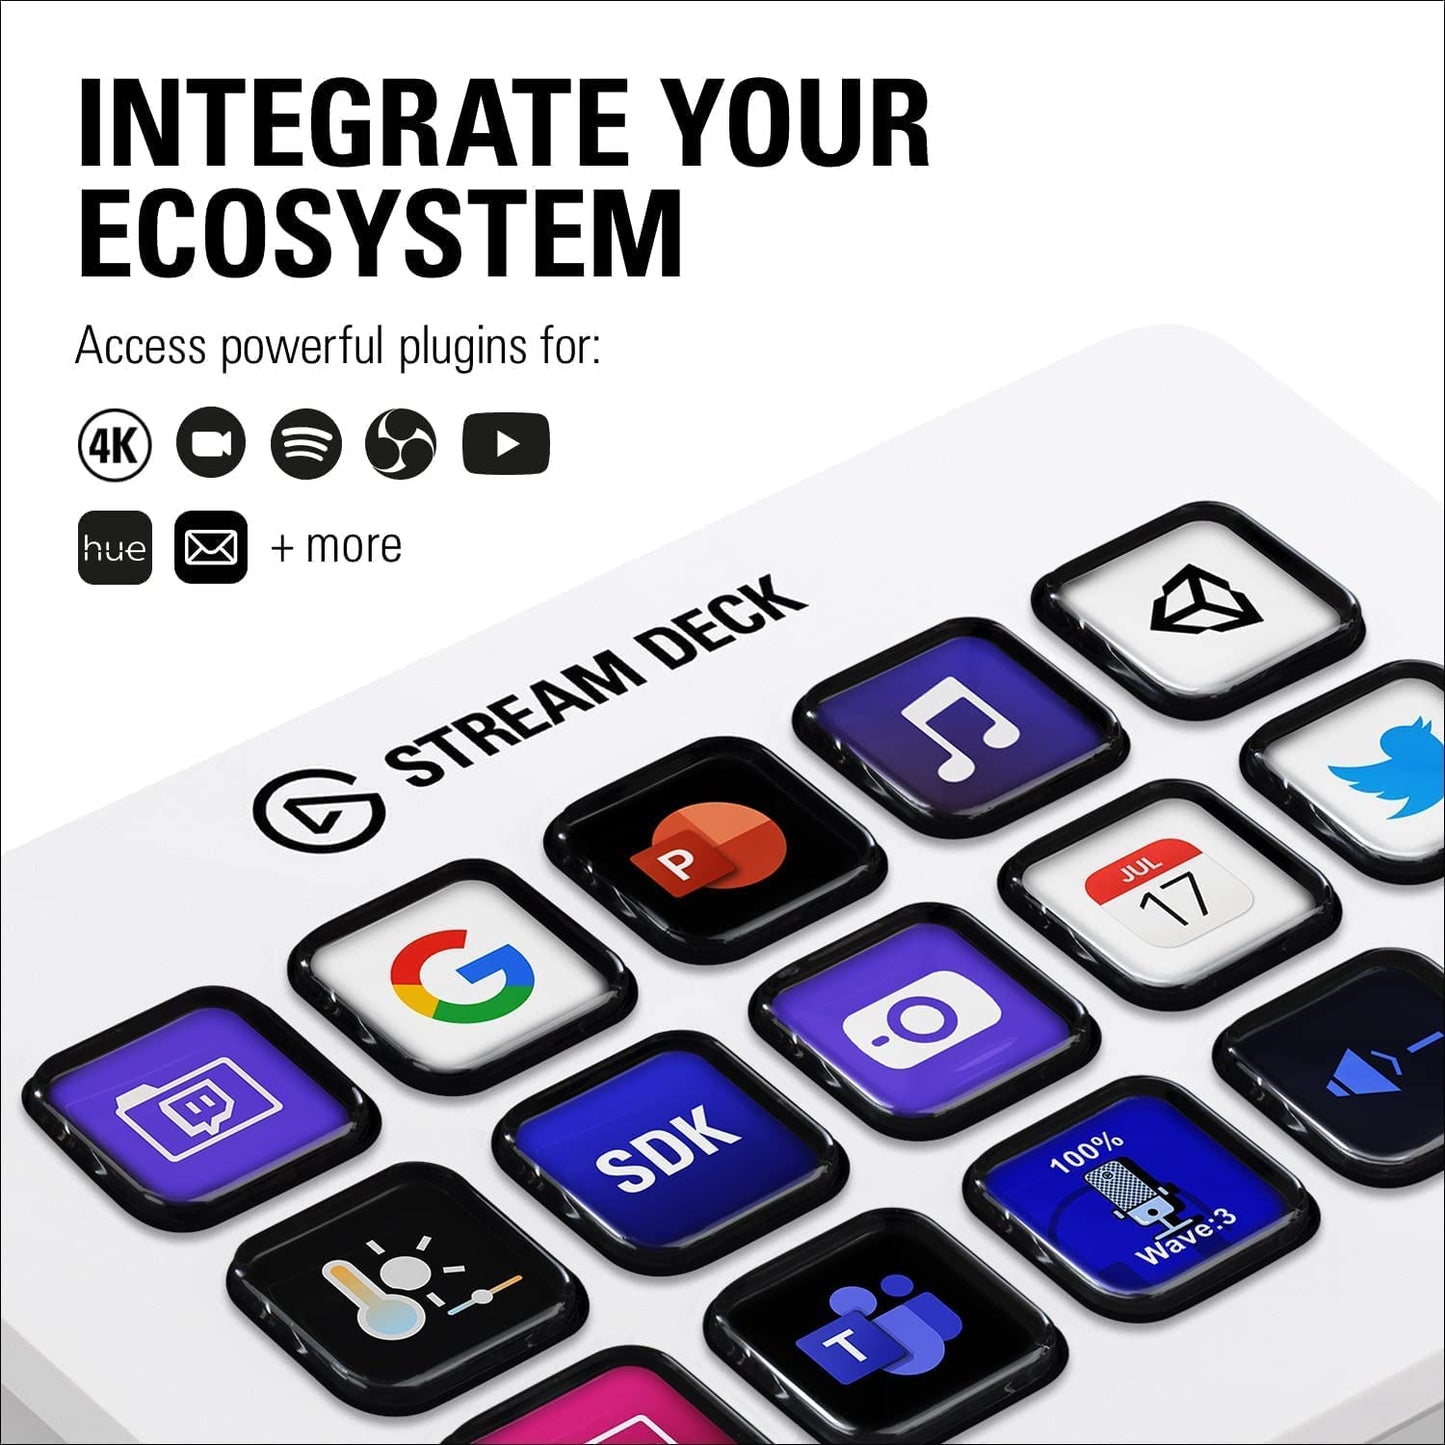 Elgato Stream Deck MK.2 White – Studio Controller, 15 macro keys, trigger actions in apps and software like OBS, Twitch, YouTube and more, works with Mac and PC